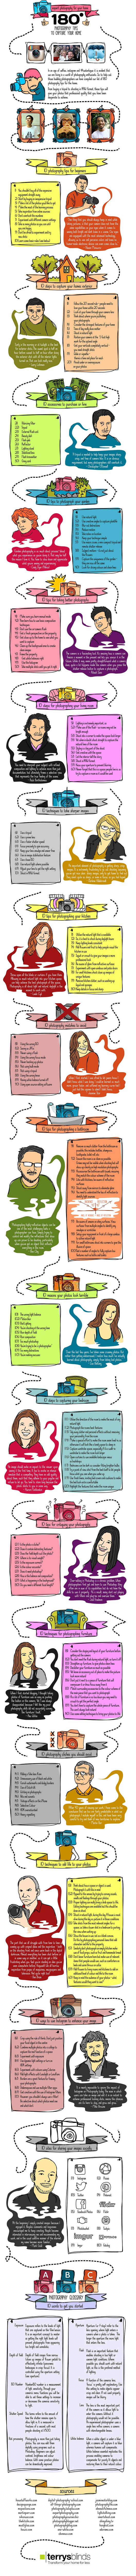 photography infographic